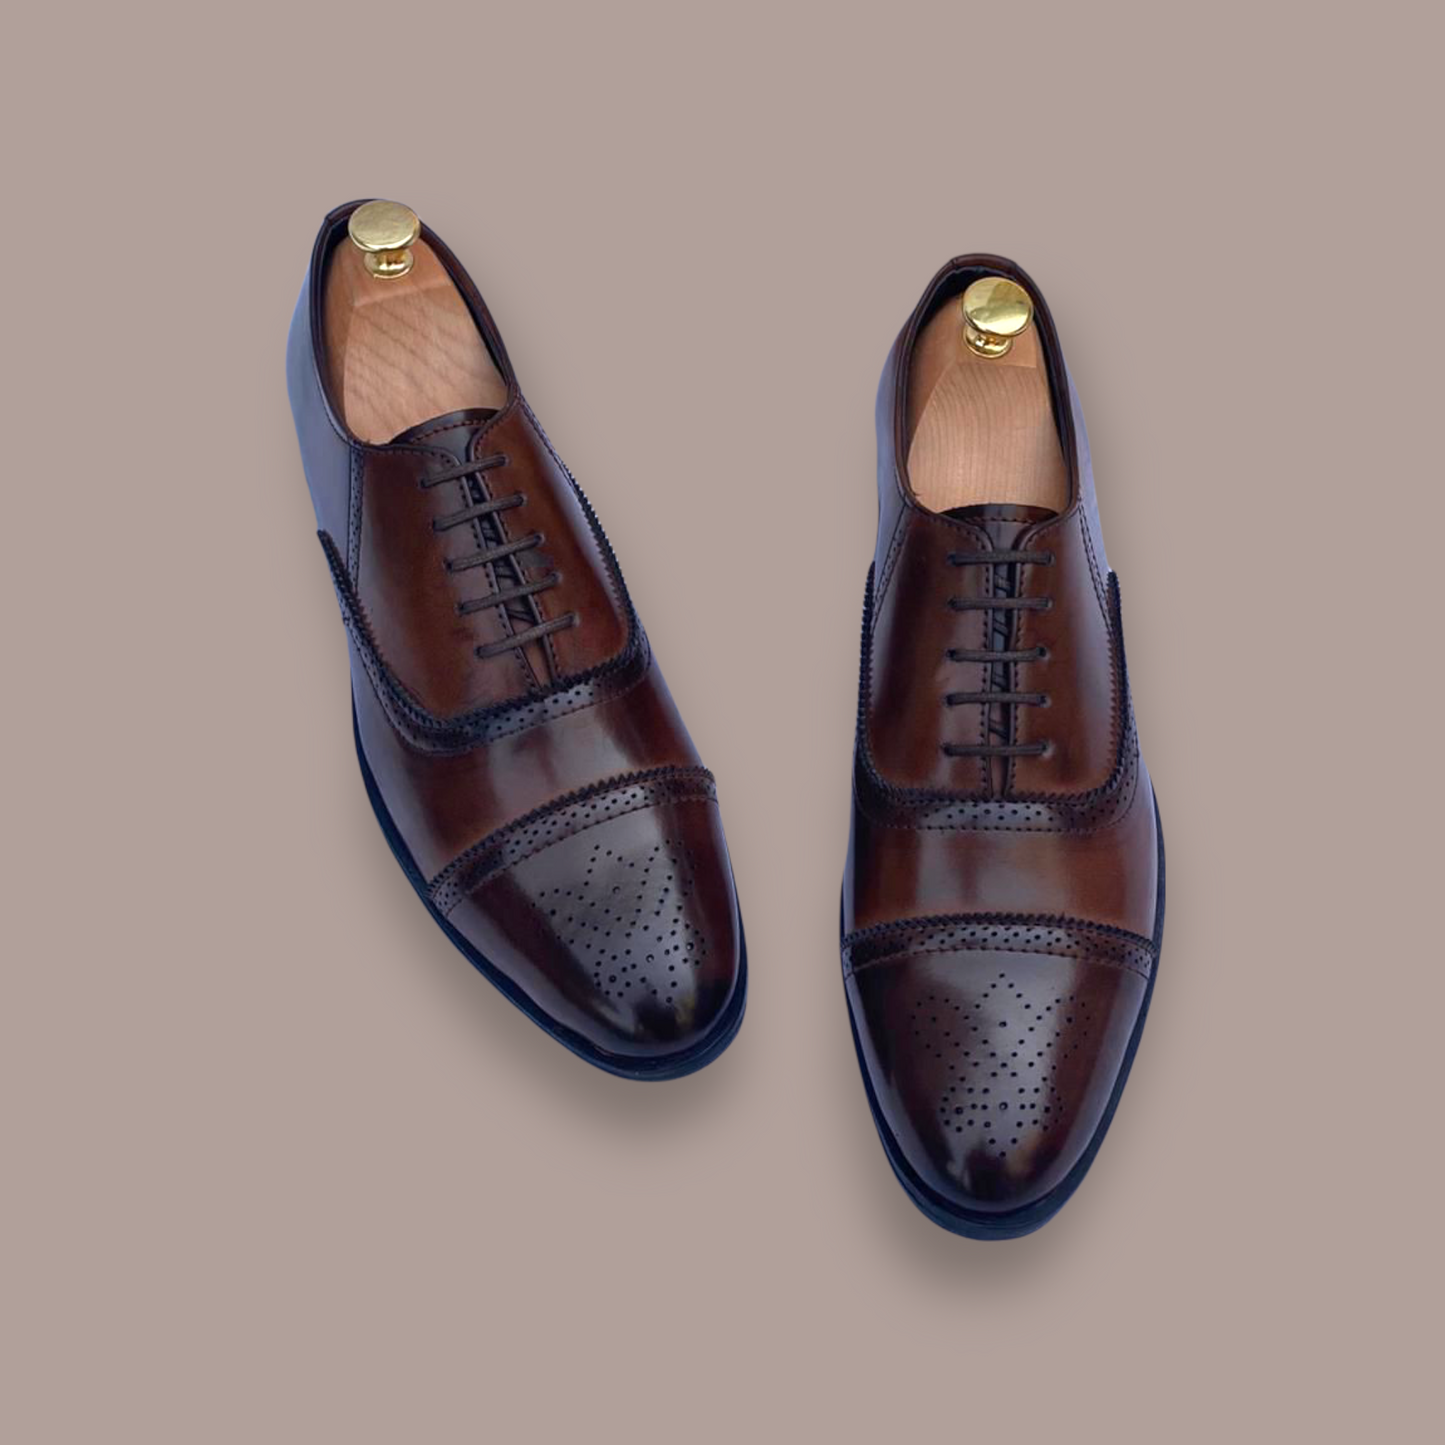 Buy Stylish Formal Shoes For Office Wear Casual Wear - JackMarc